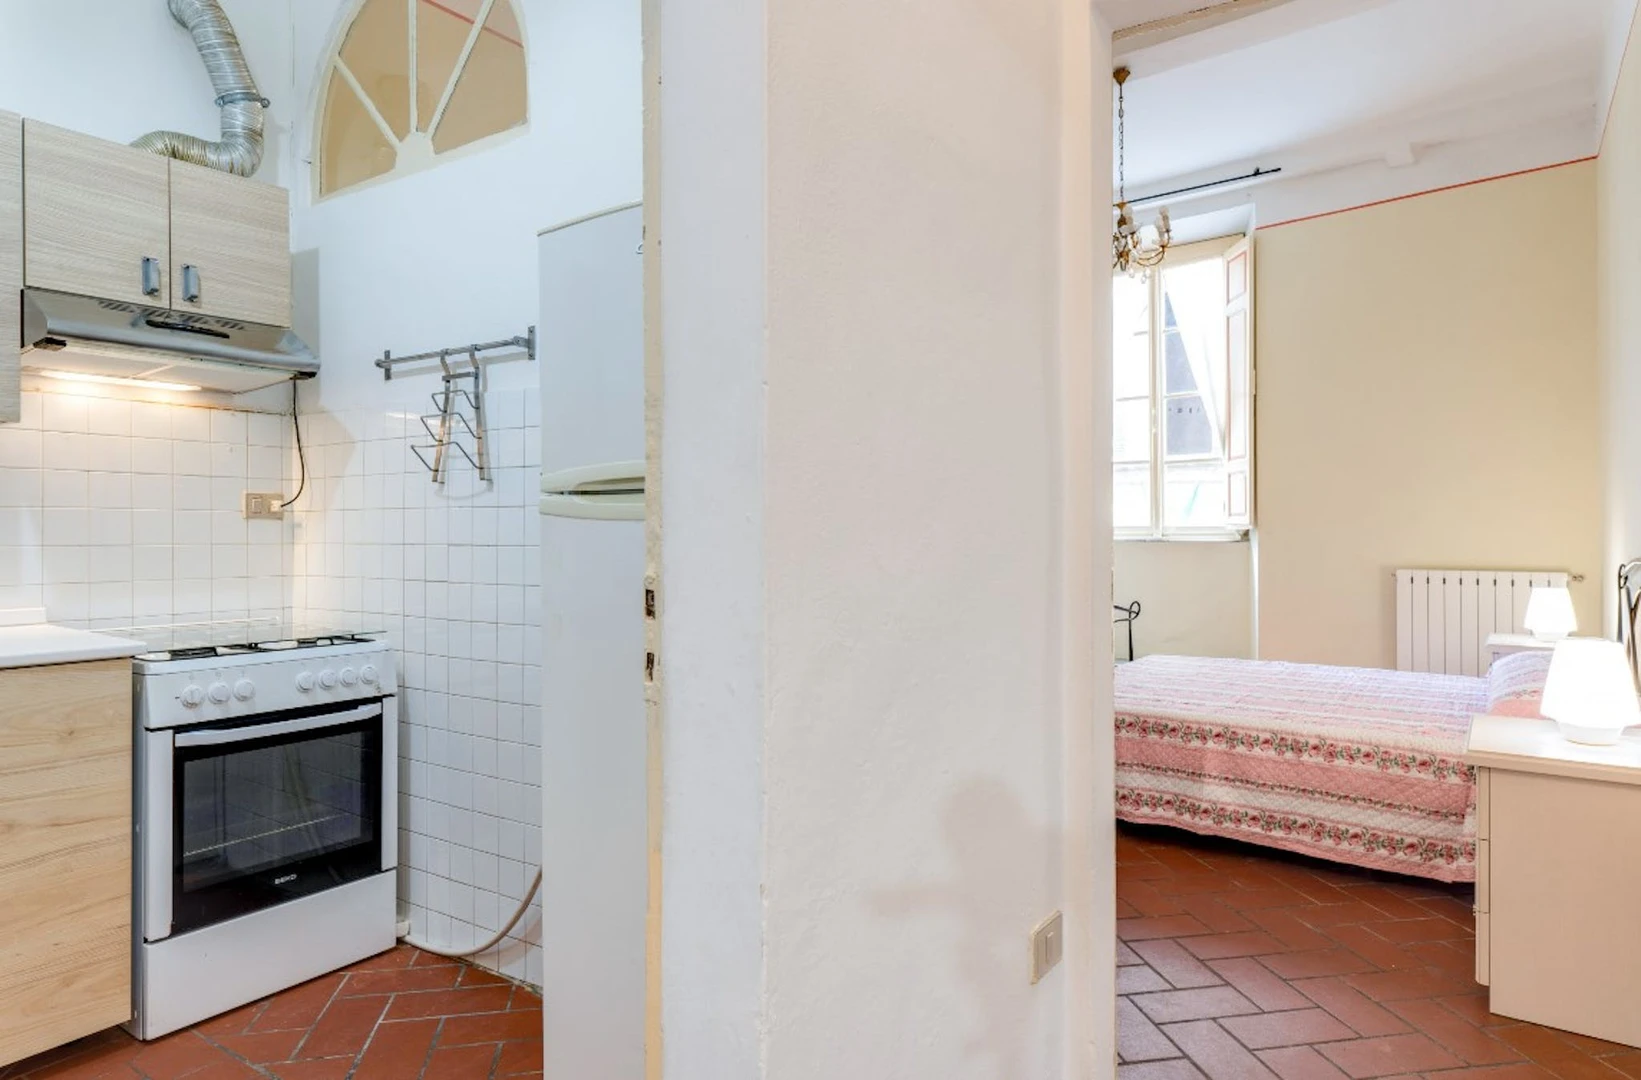 Accommodation with 3 bedrooms in Lucca